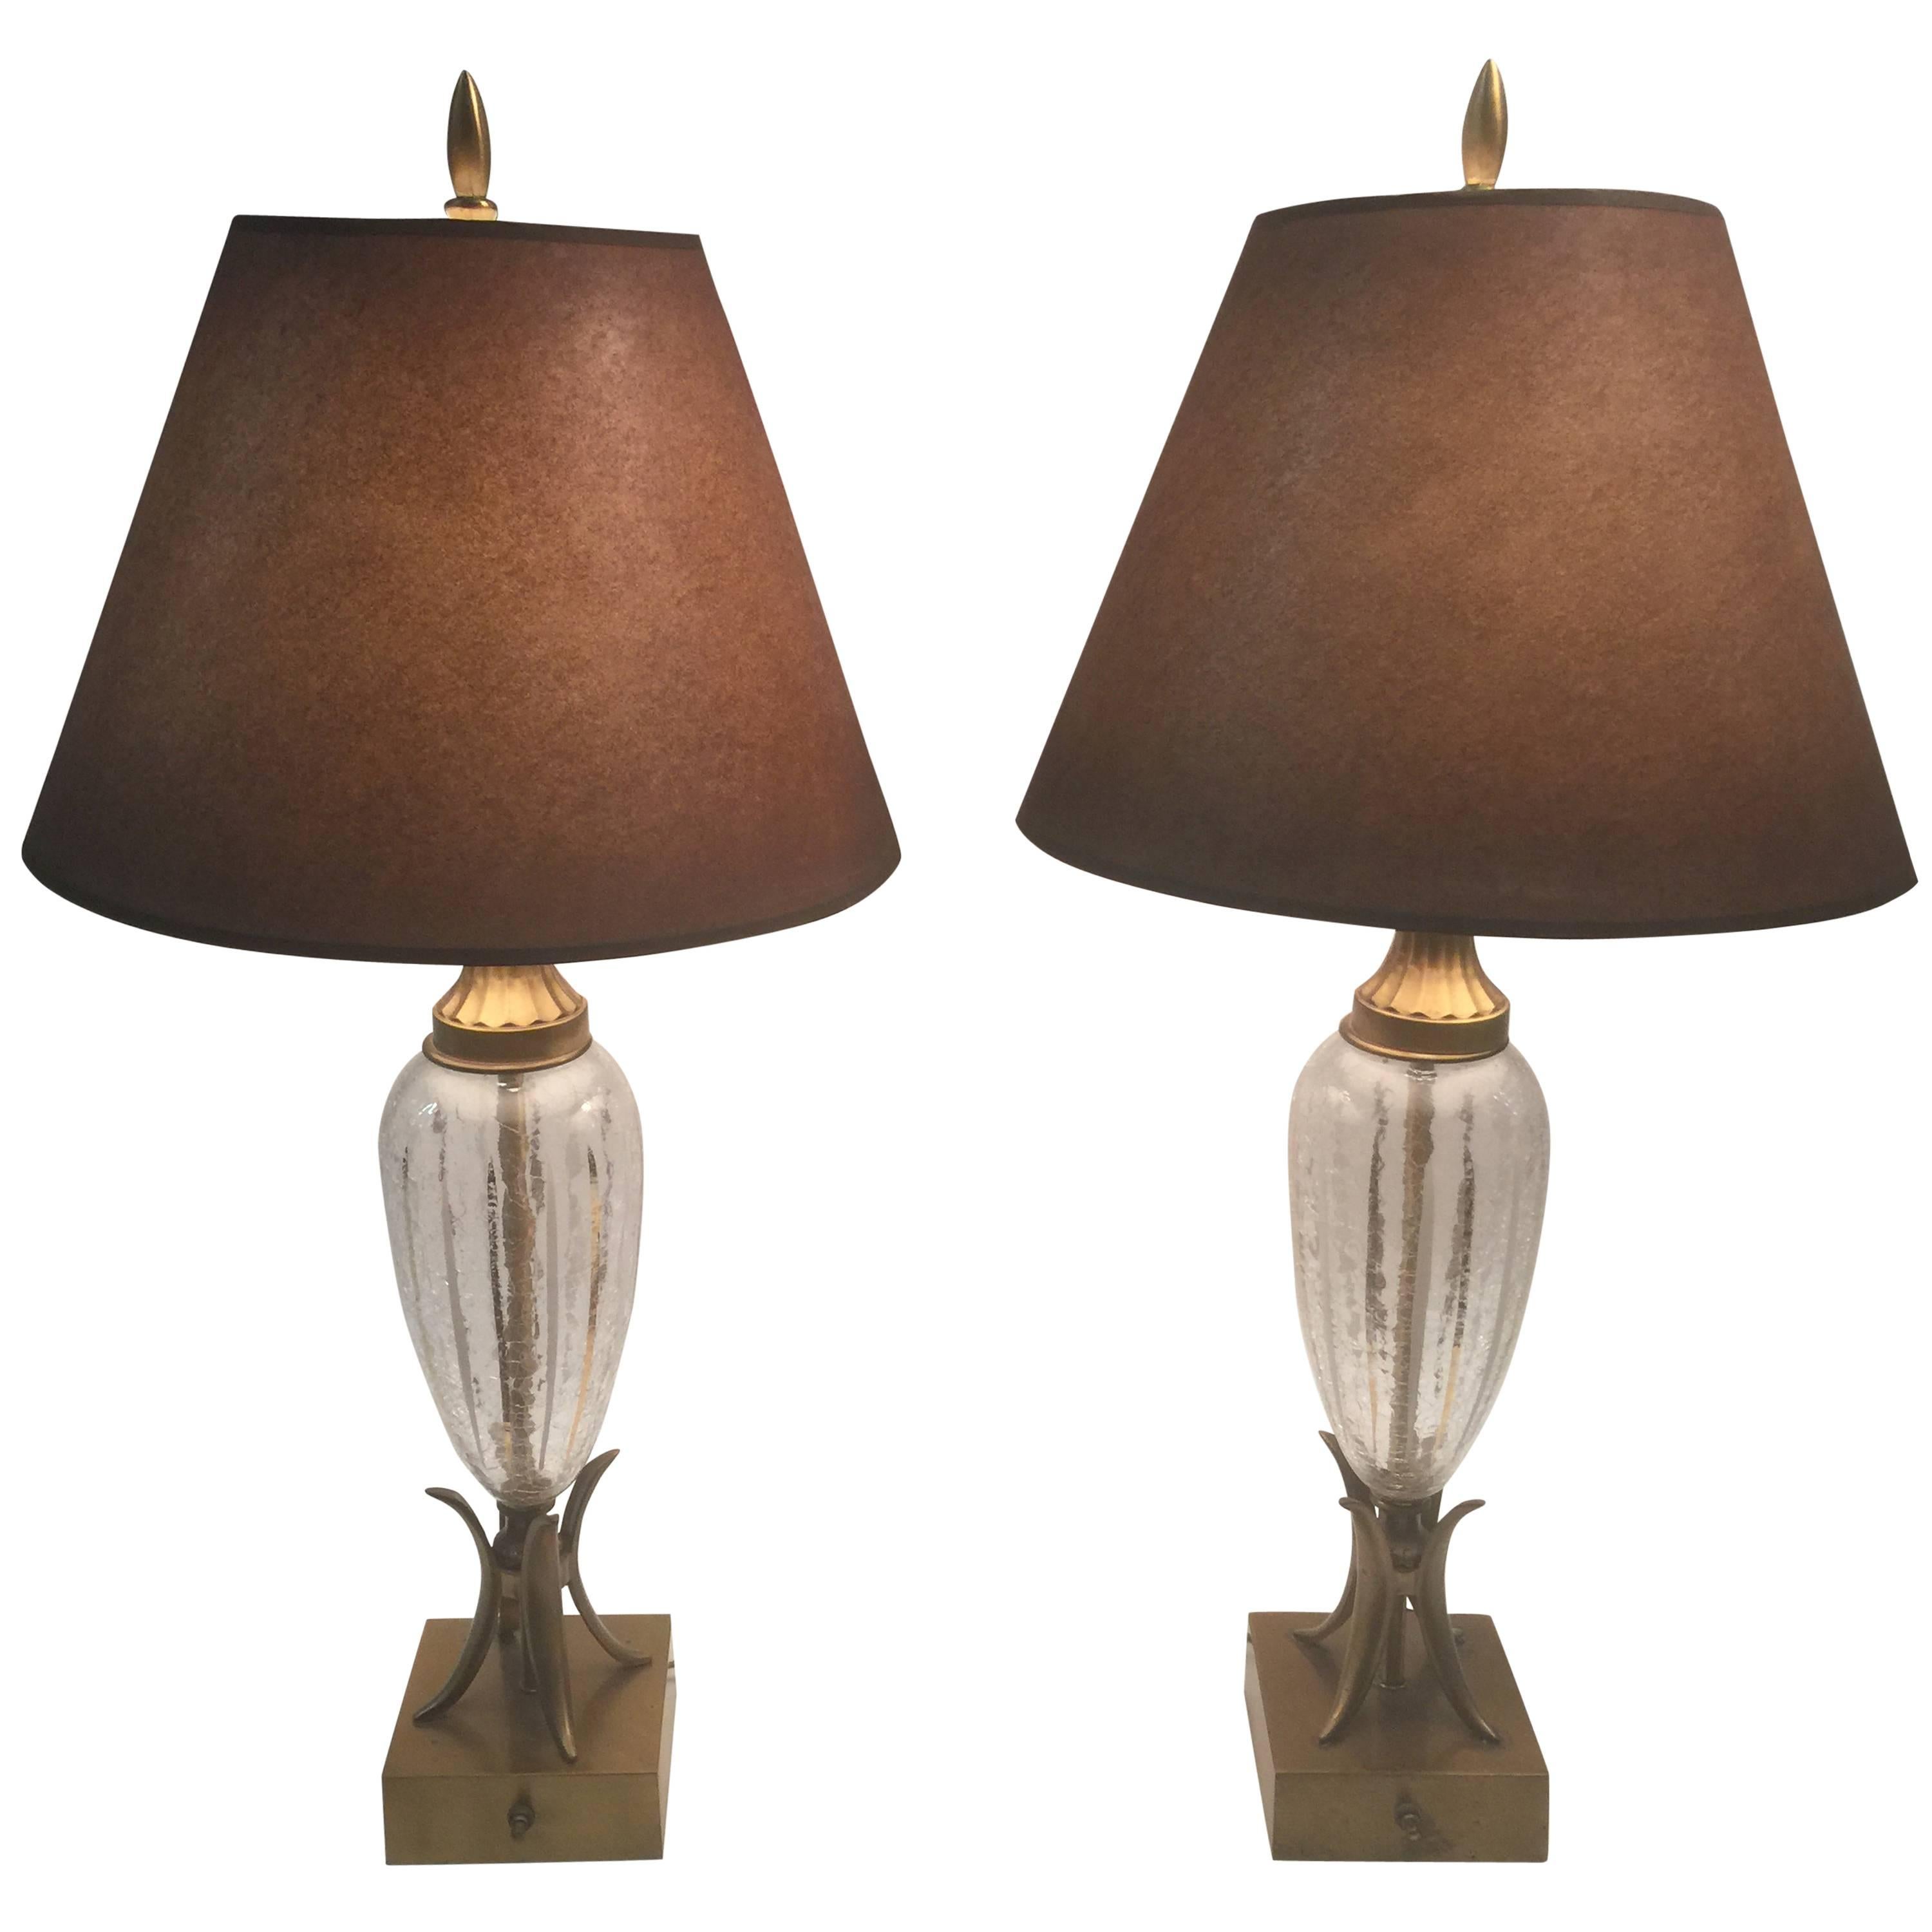  Fantastic Pair of Modernistic Italian Crackle Glass Lamps For Sale